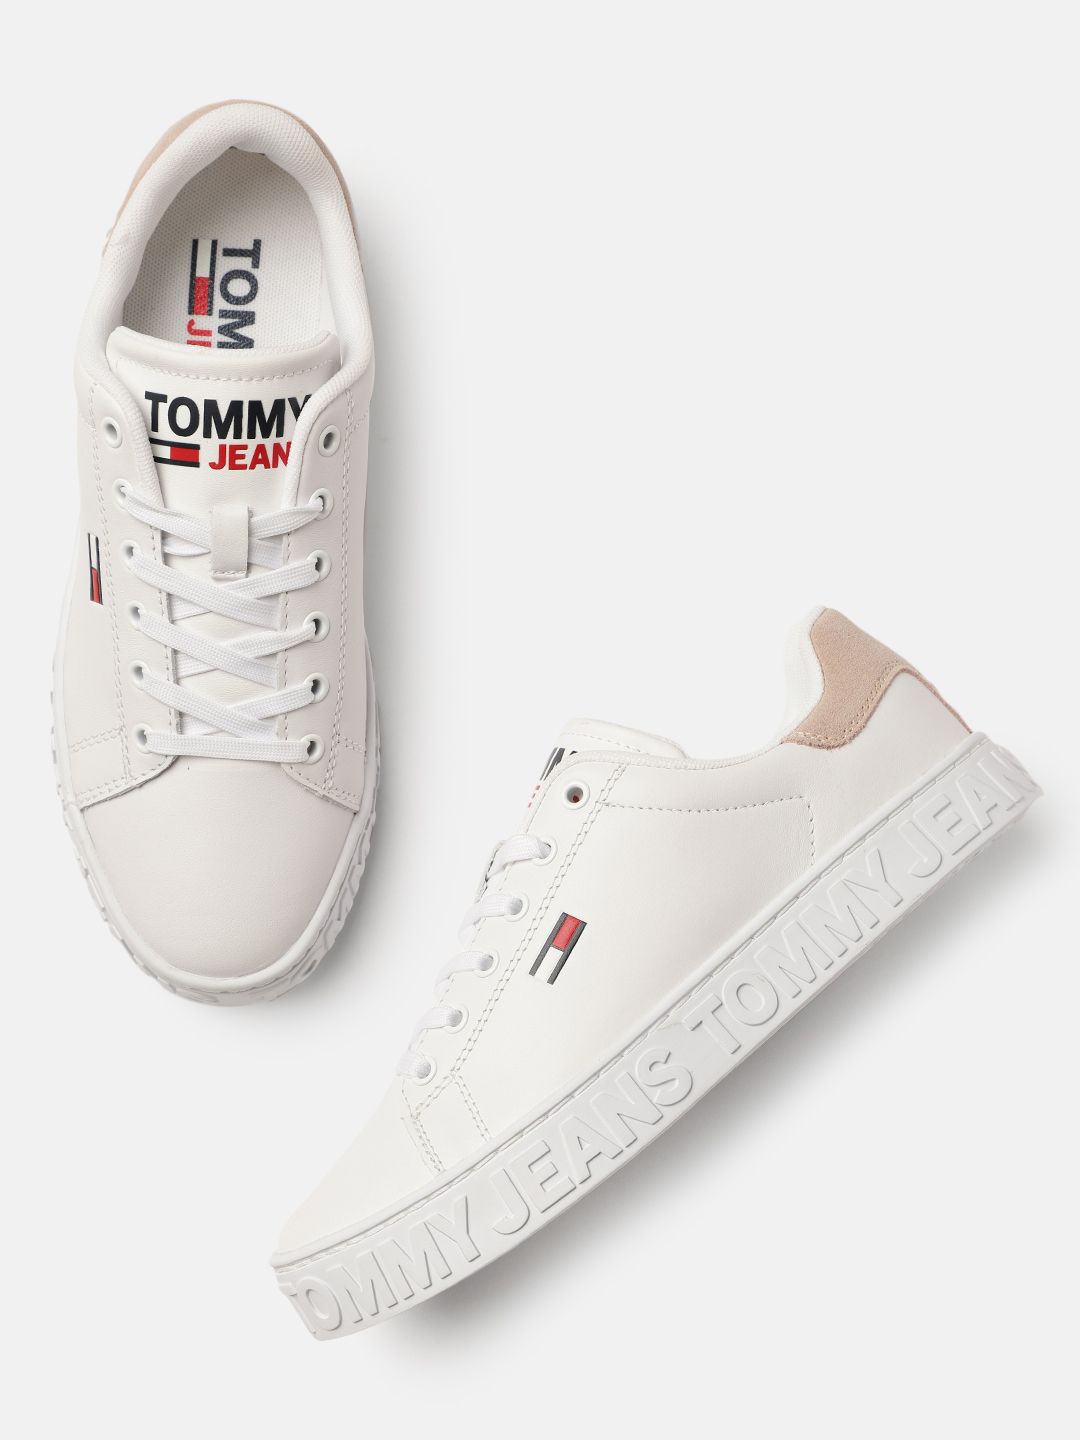 Tommy Hilfiger Women White Solid Leather Regular Sneakers Price in India